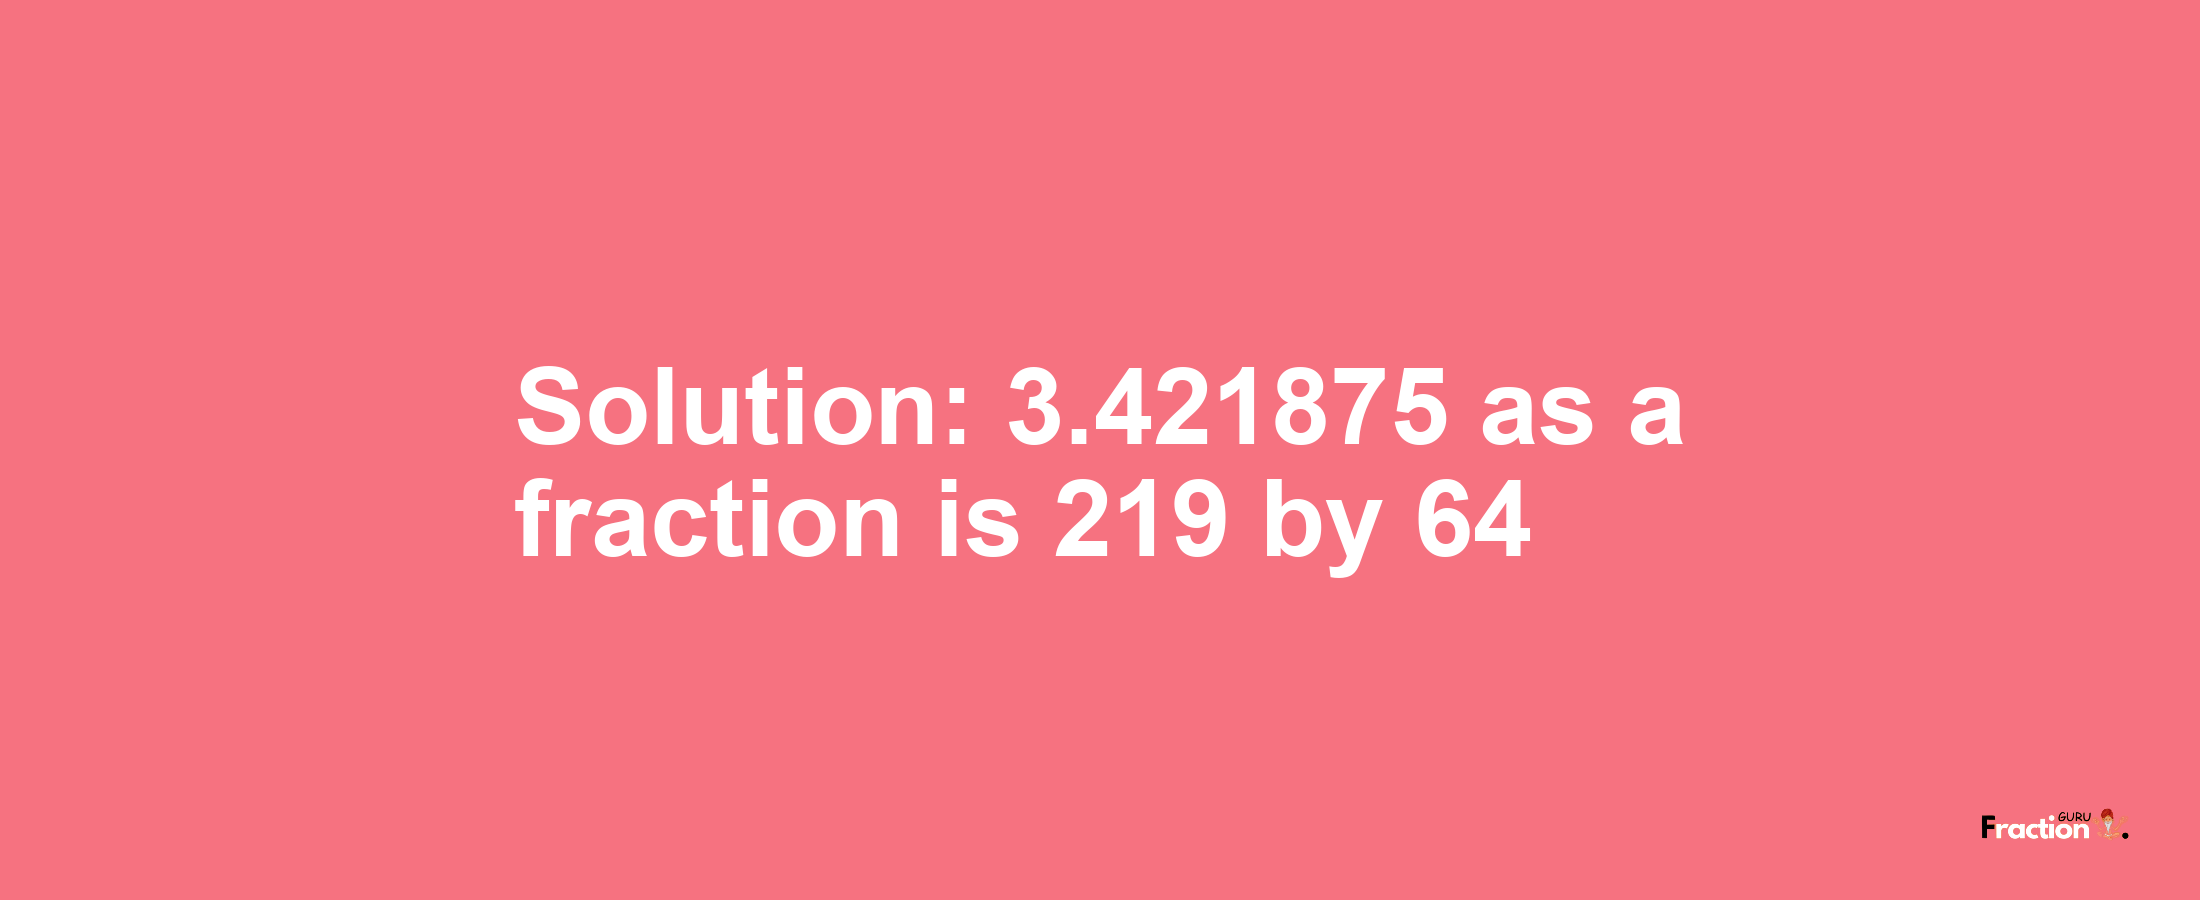 Solution:3.421875 as a fraction is 219/64